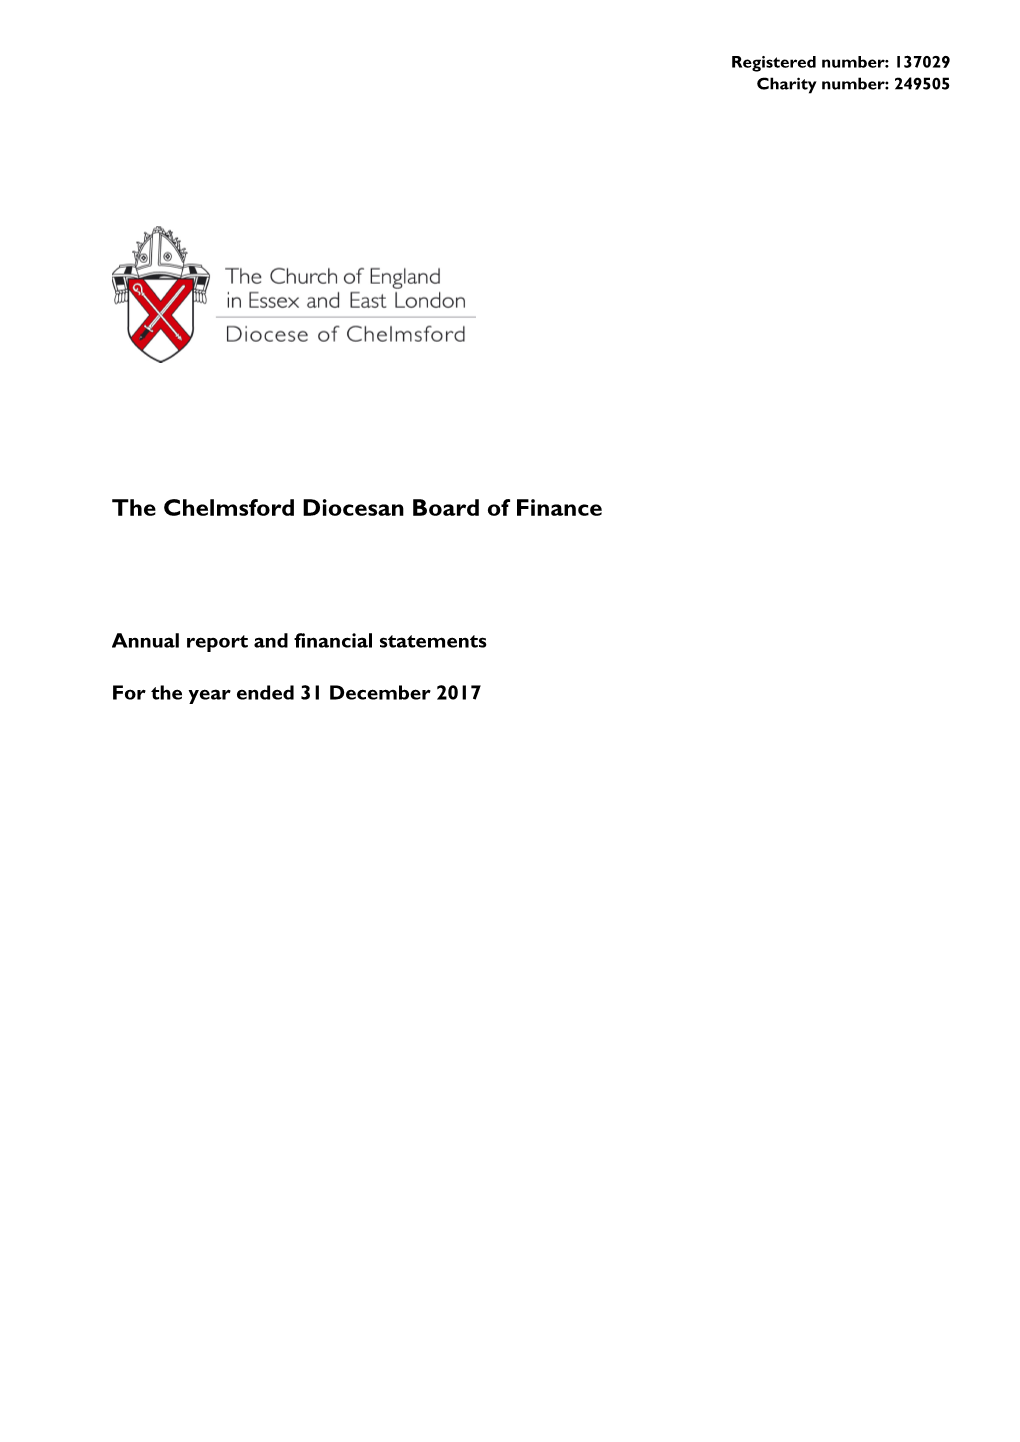 The Chelmsford Diocesan Board of Finance